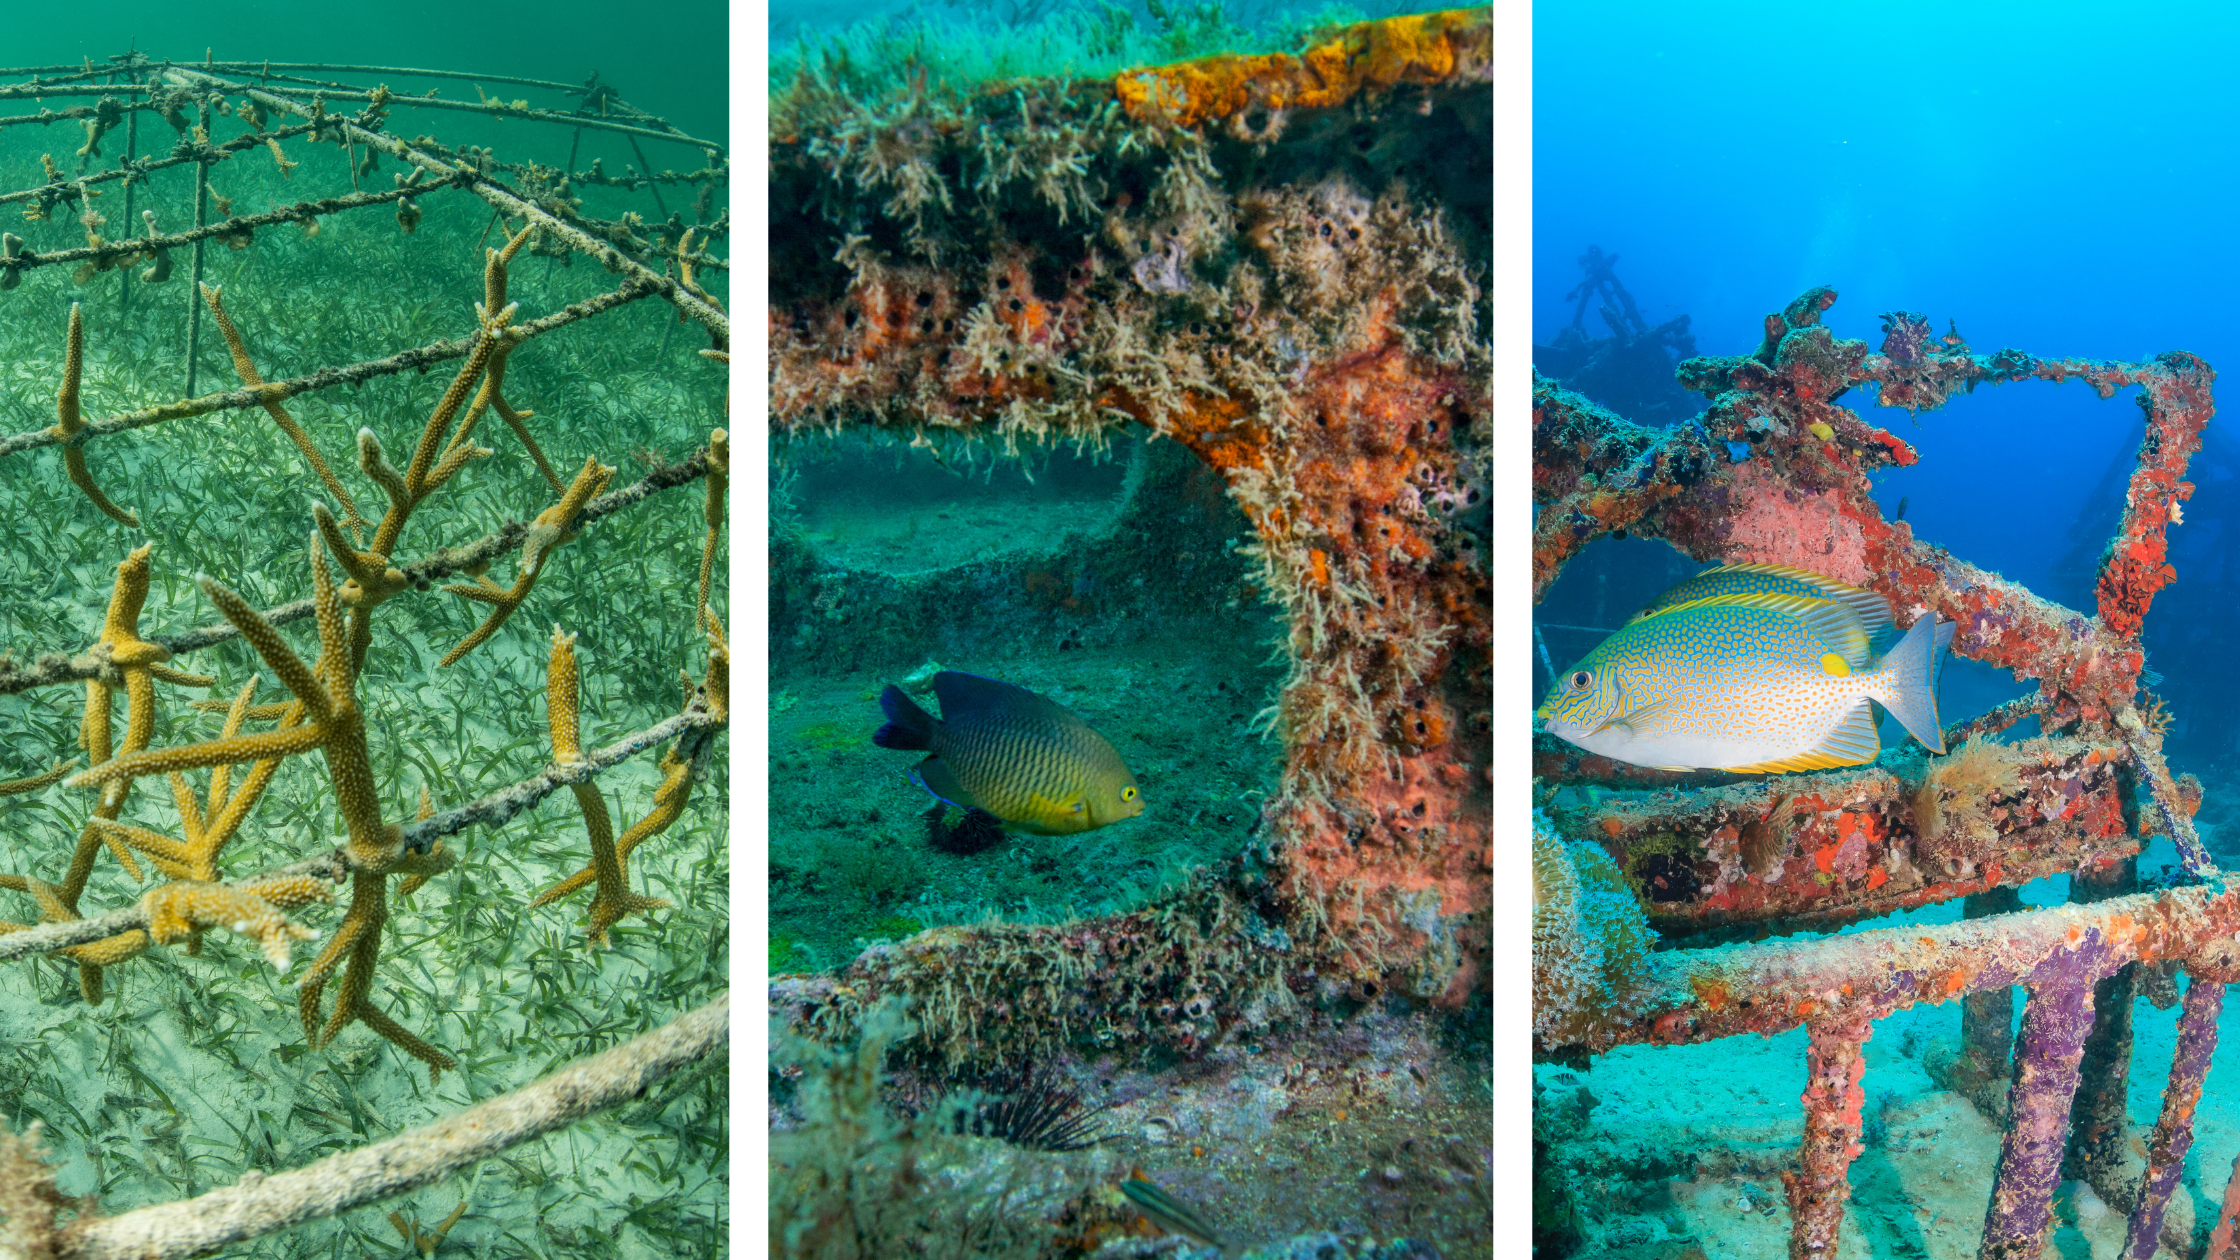 Three different types of reefs are shown side by side in a collage to demonstrate the wide variety of requests a contractor might get for building artificial reefs.